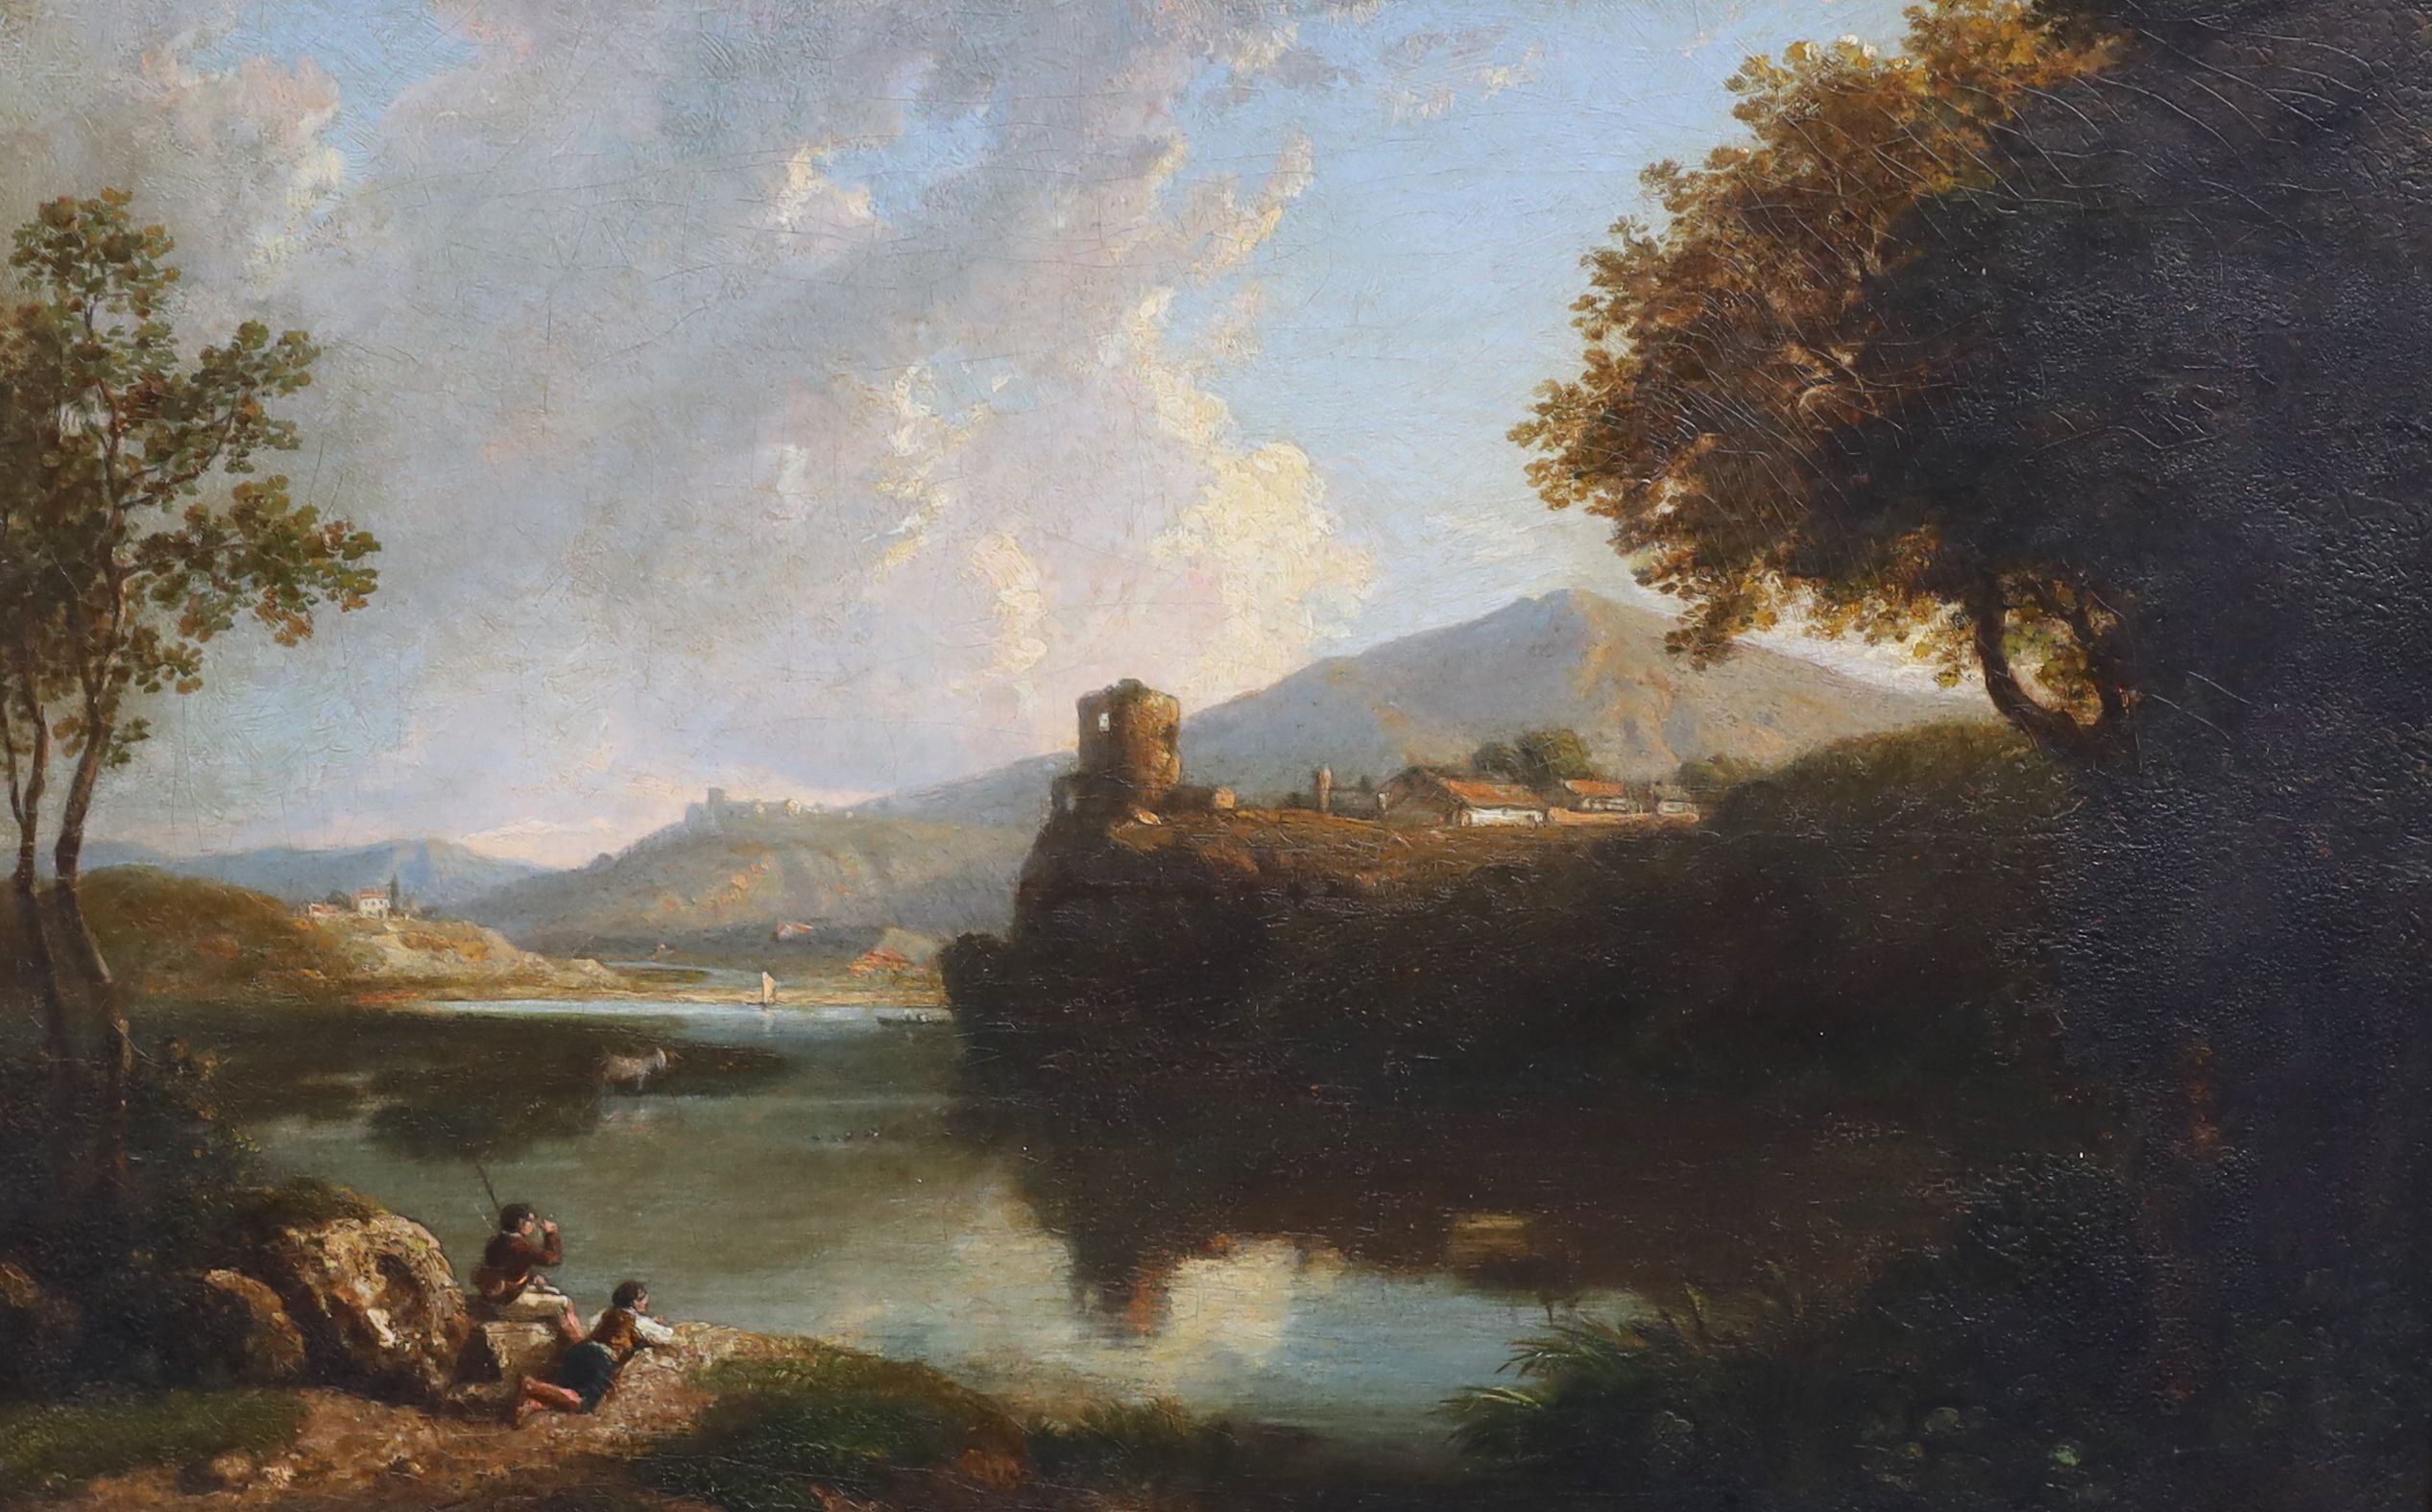 Circle of William Havell (1782-1857), Italianate river landscape with boys in the foreground, oil on canvas, 40 x 62cm